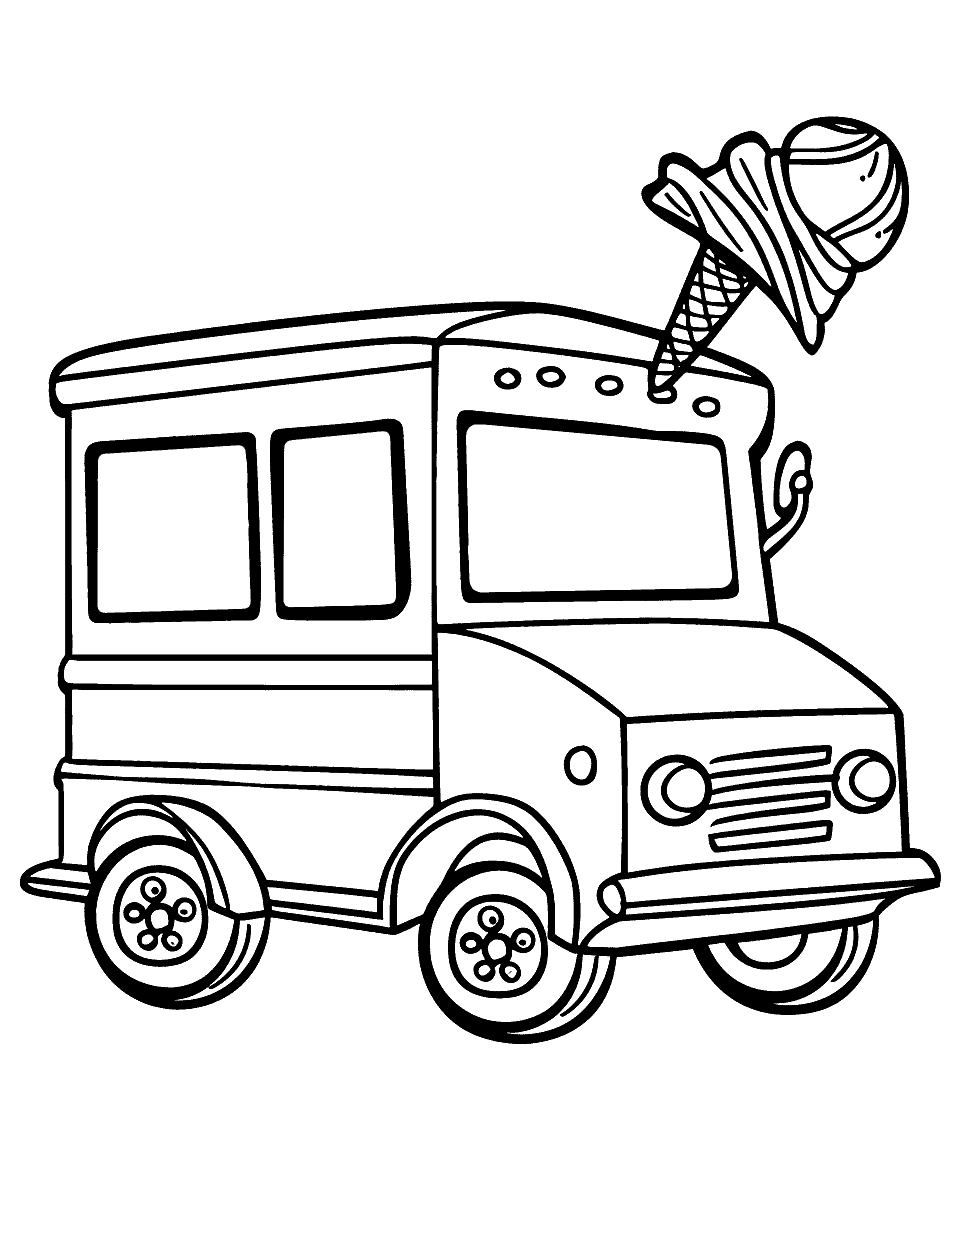 Ice Cream Truck Coloring Page - An ice cream truck on the road.